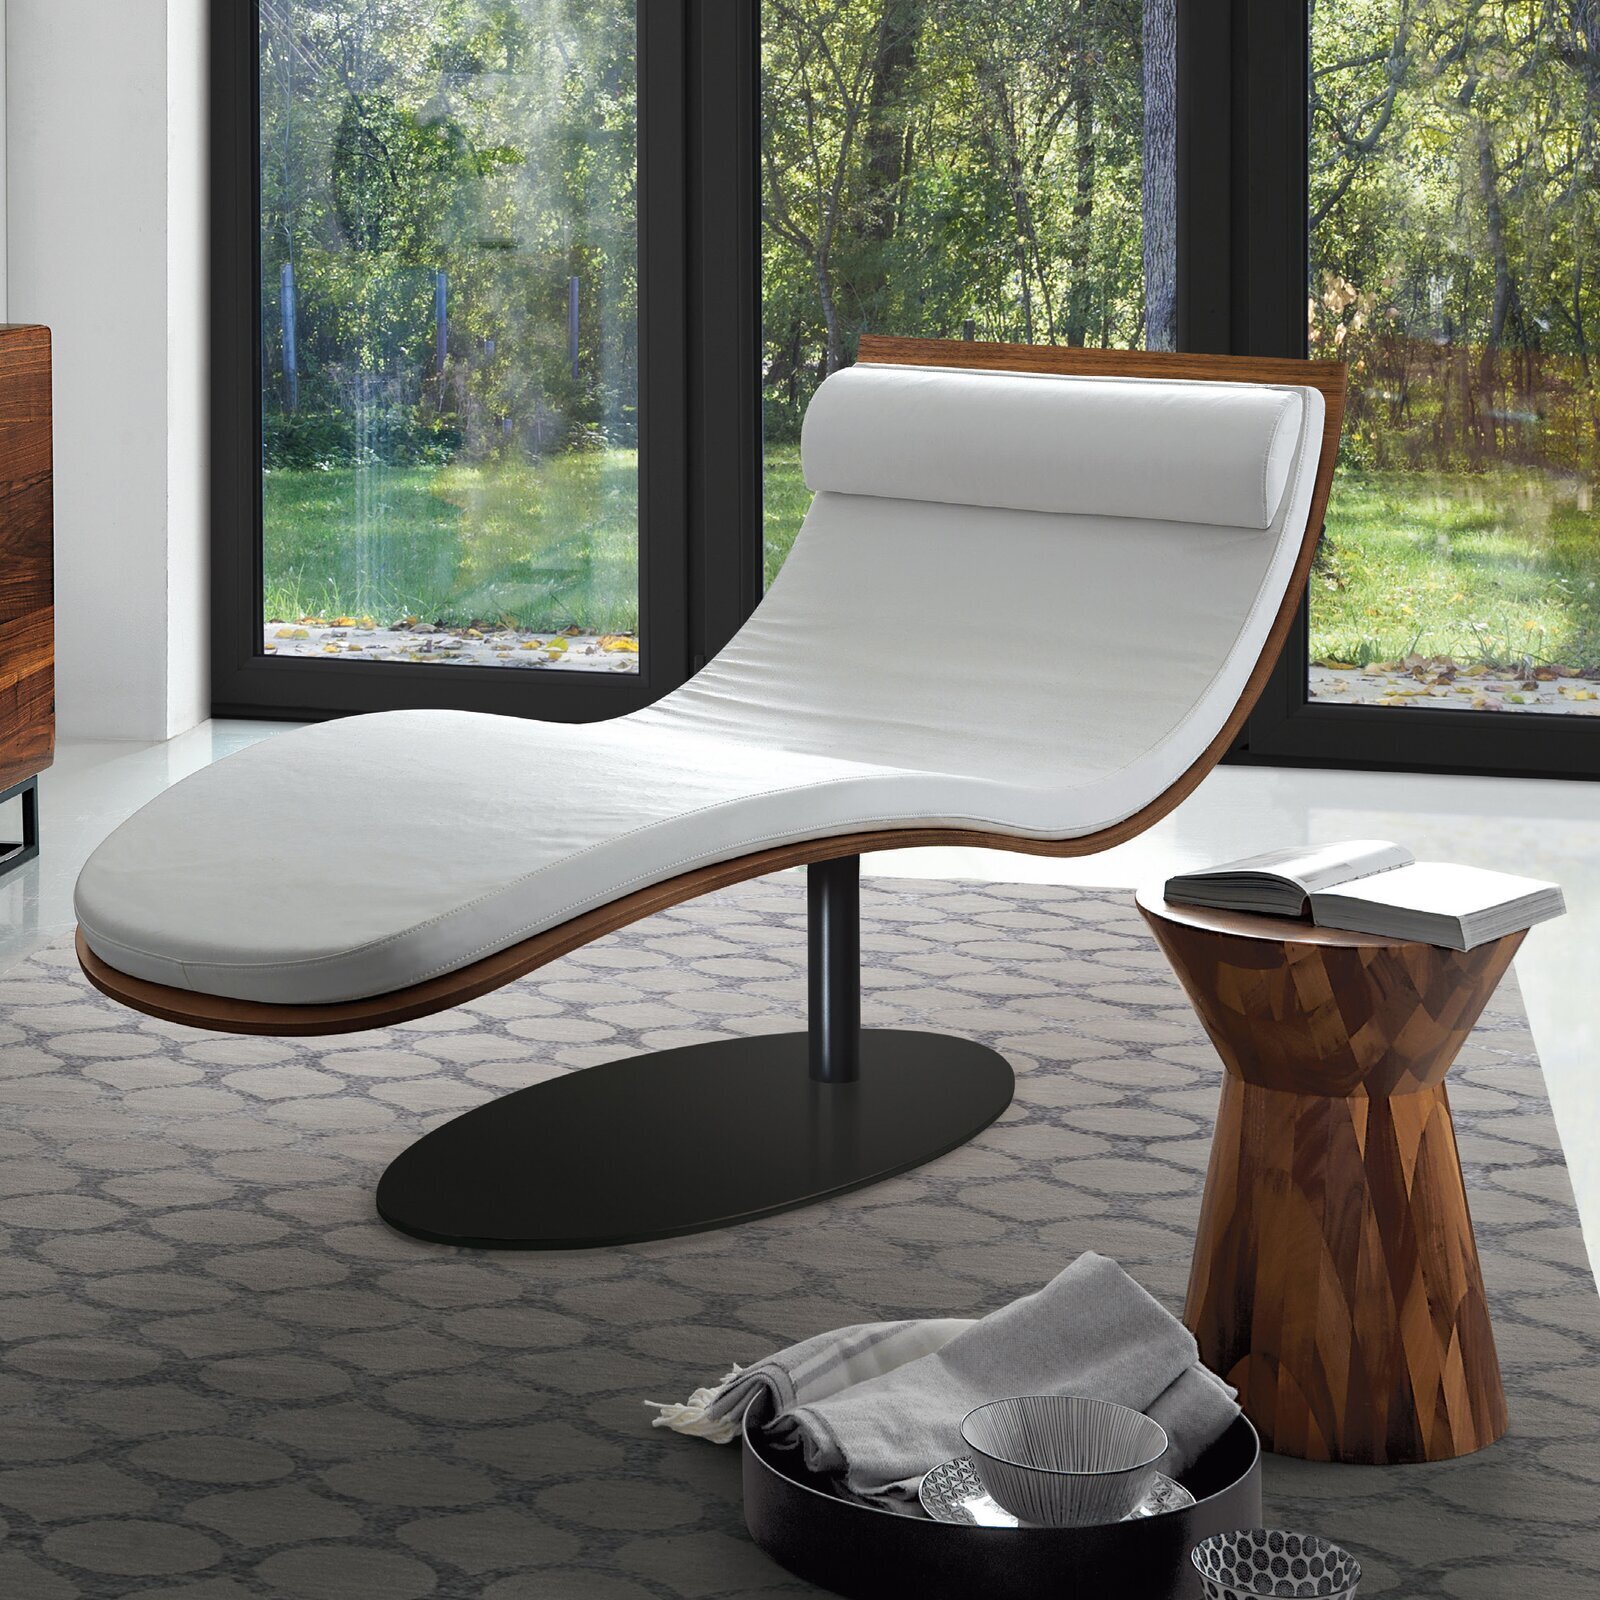 White leather chaise lounge chair with pedestal base